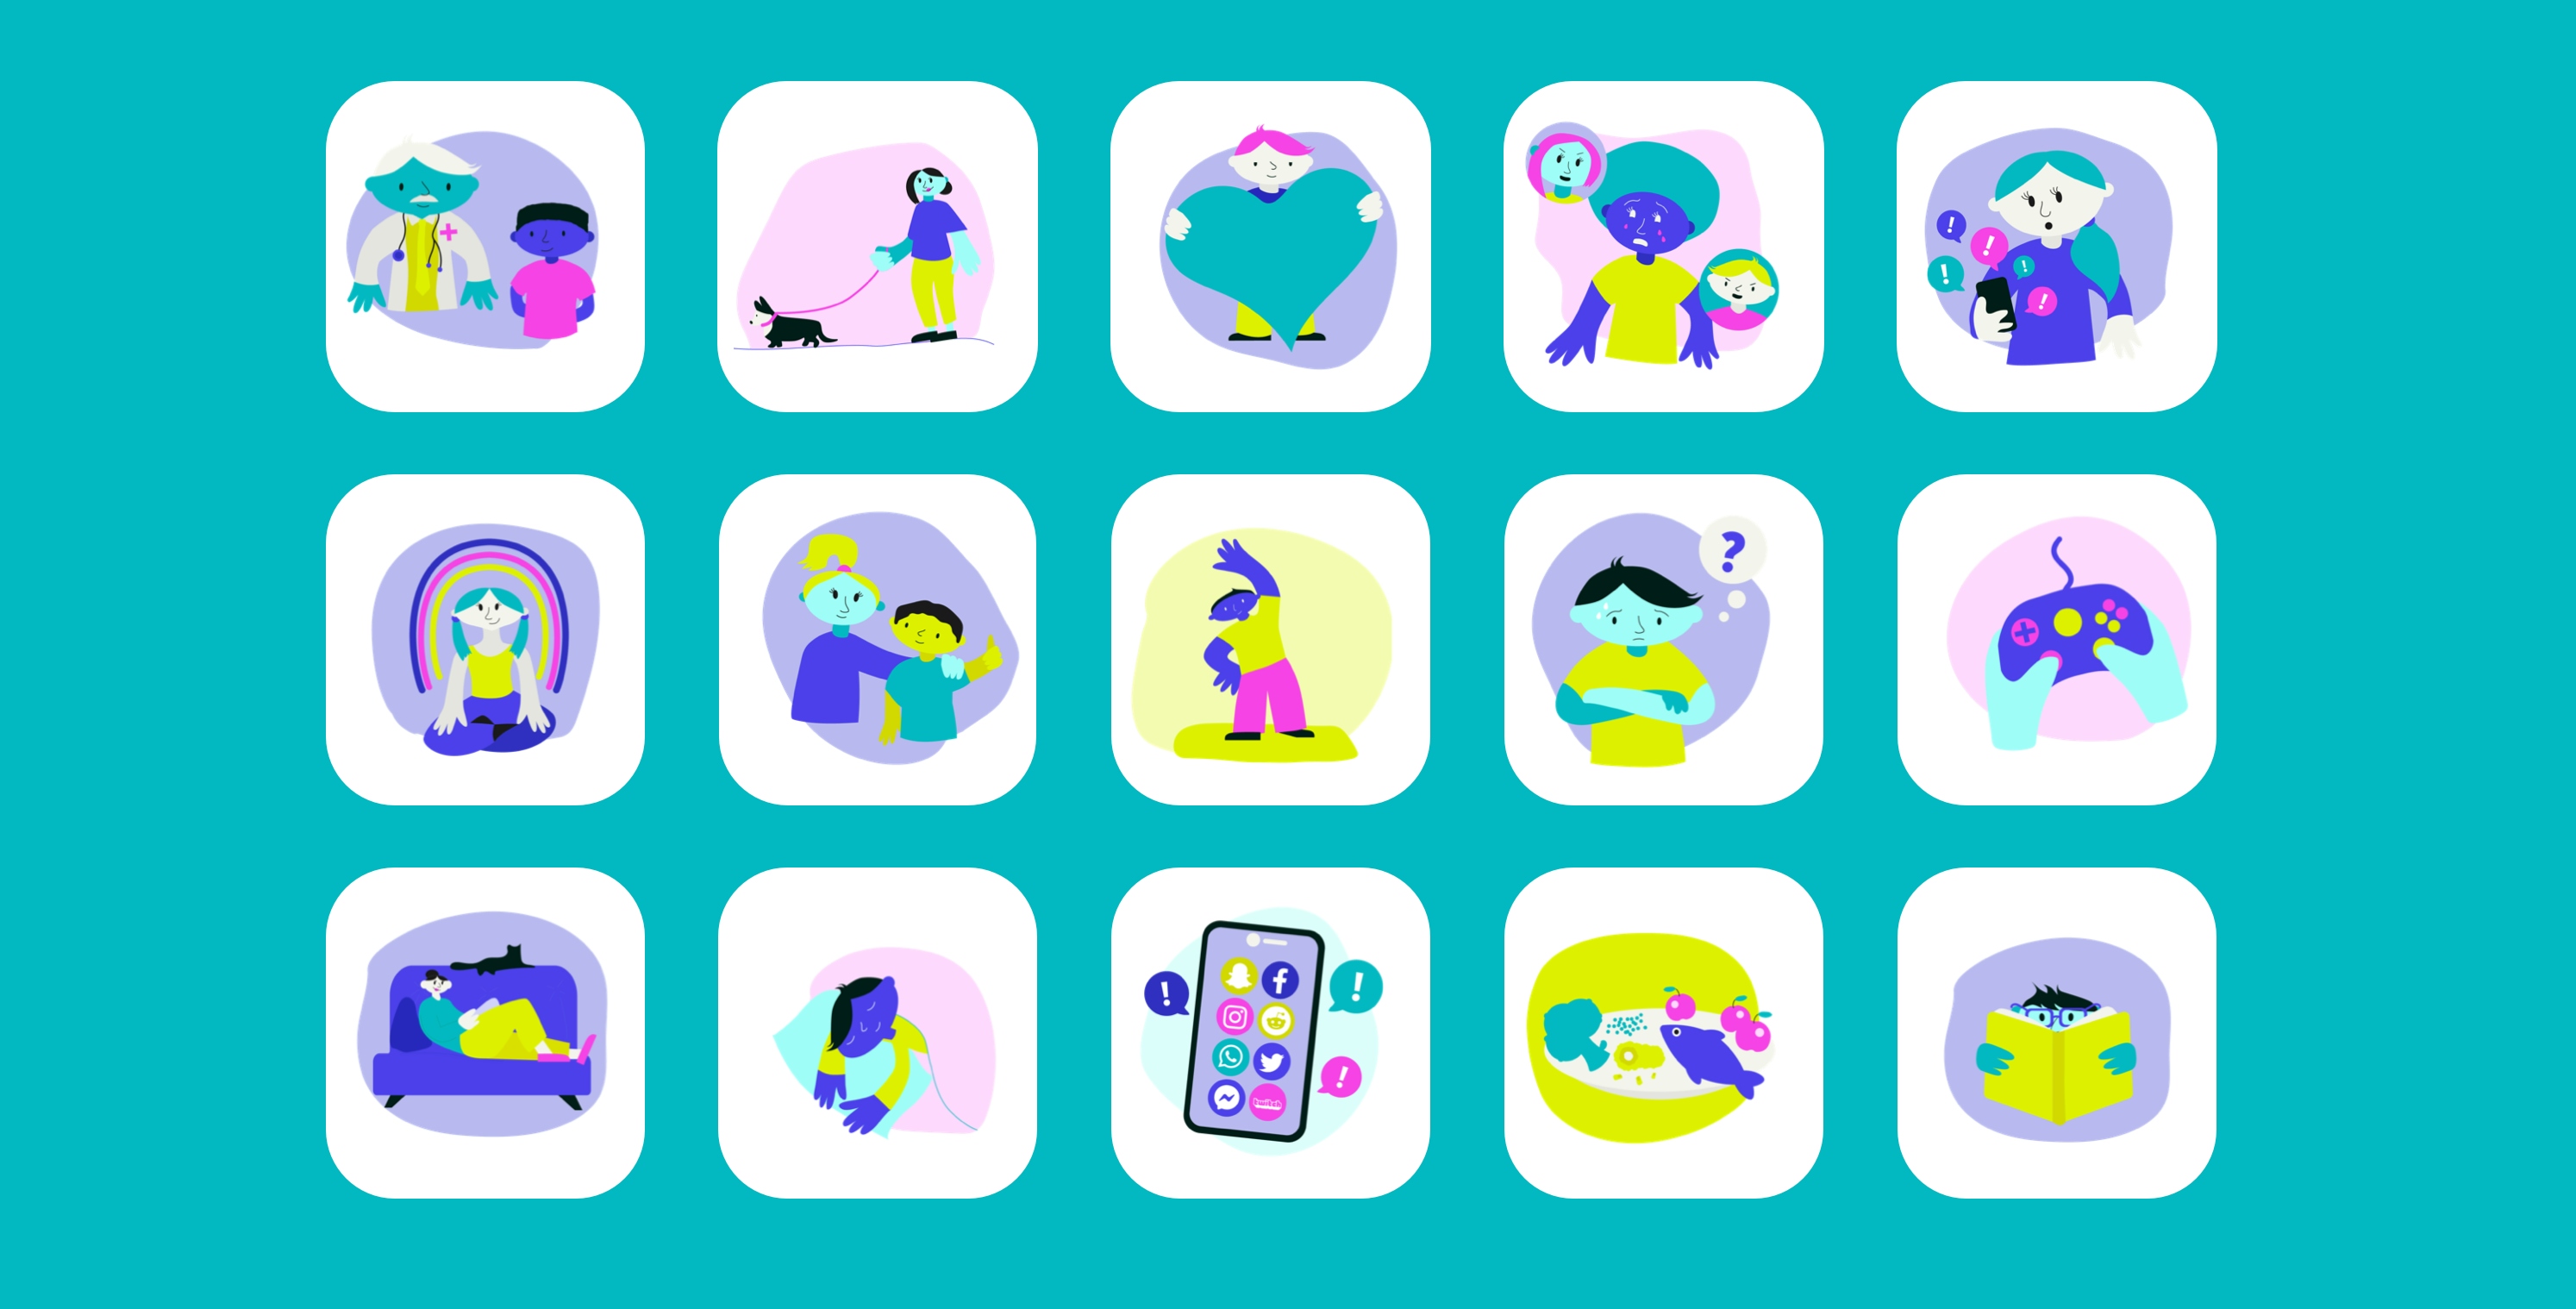 15 different icons sit on a teal background